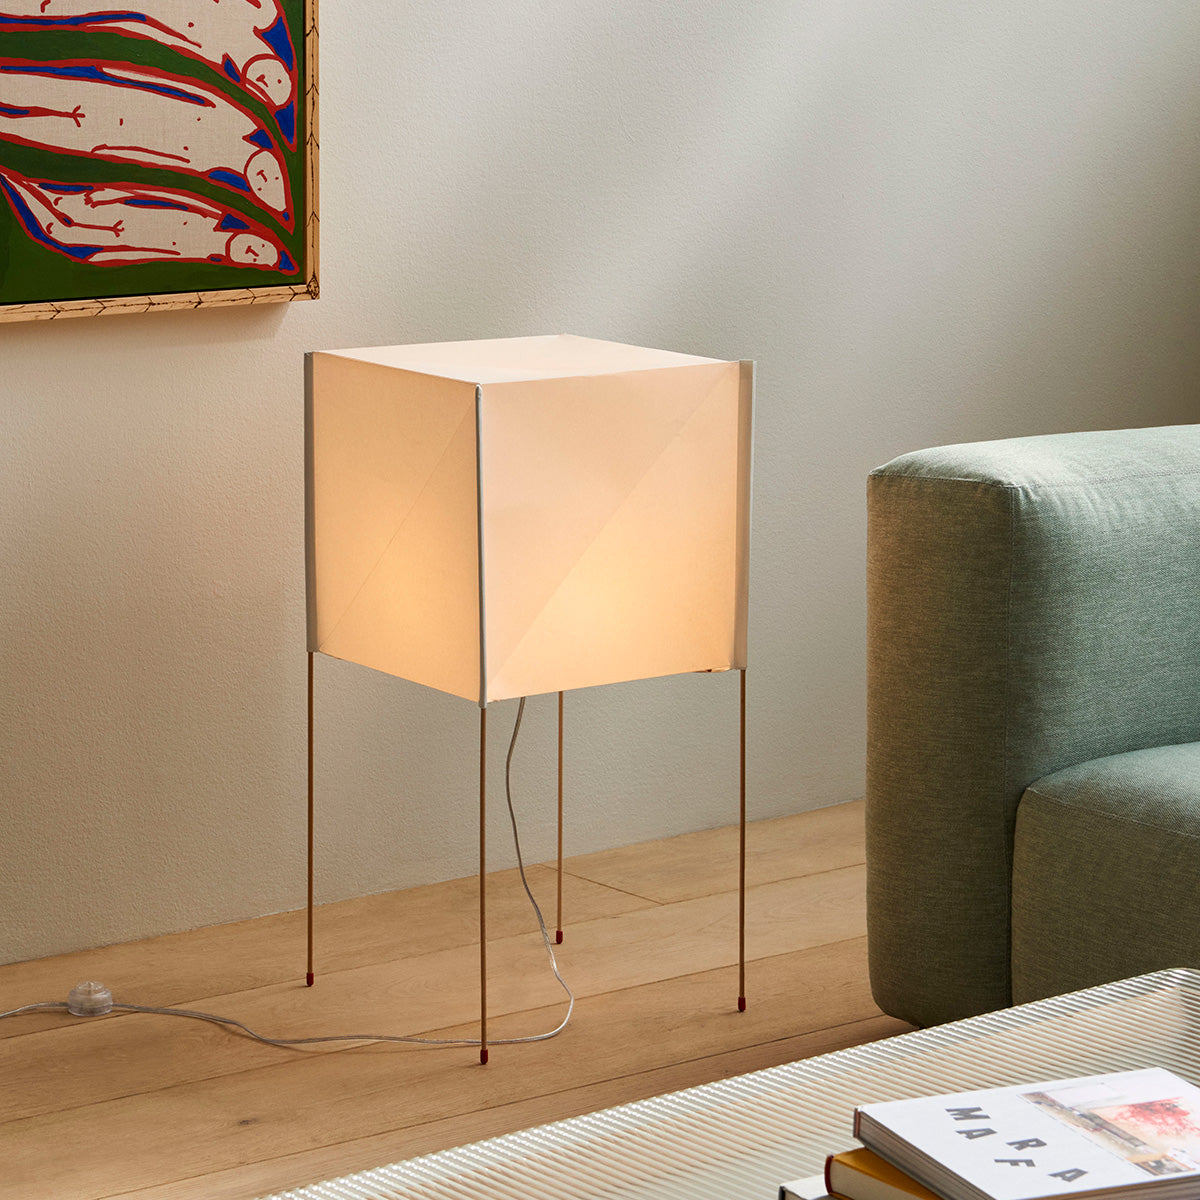 Hay paper Cube Floor lamp with on/off switch on the cable